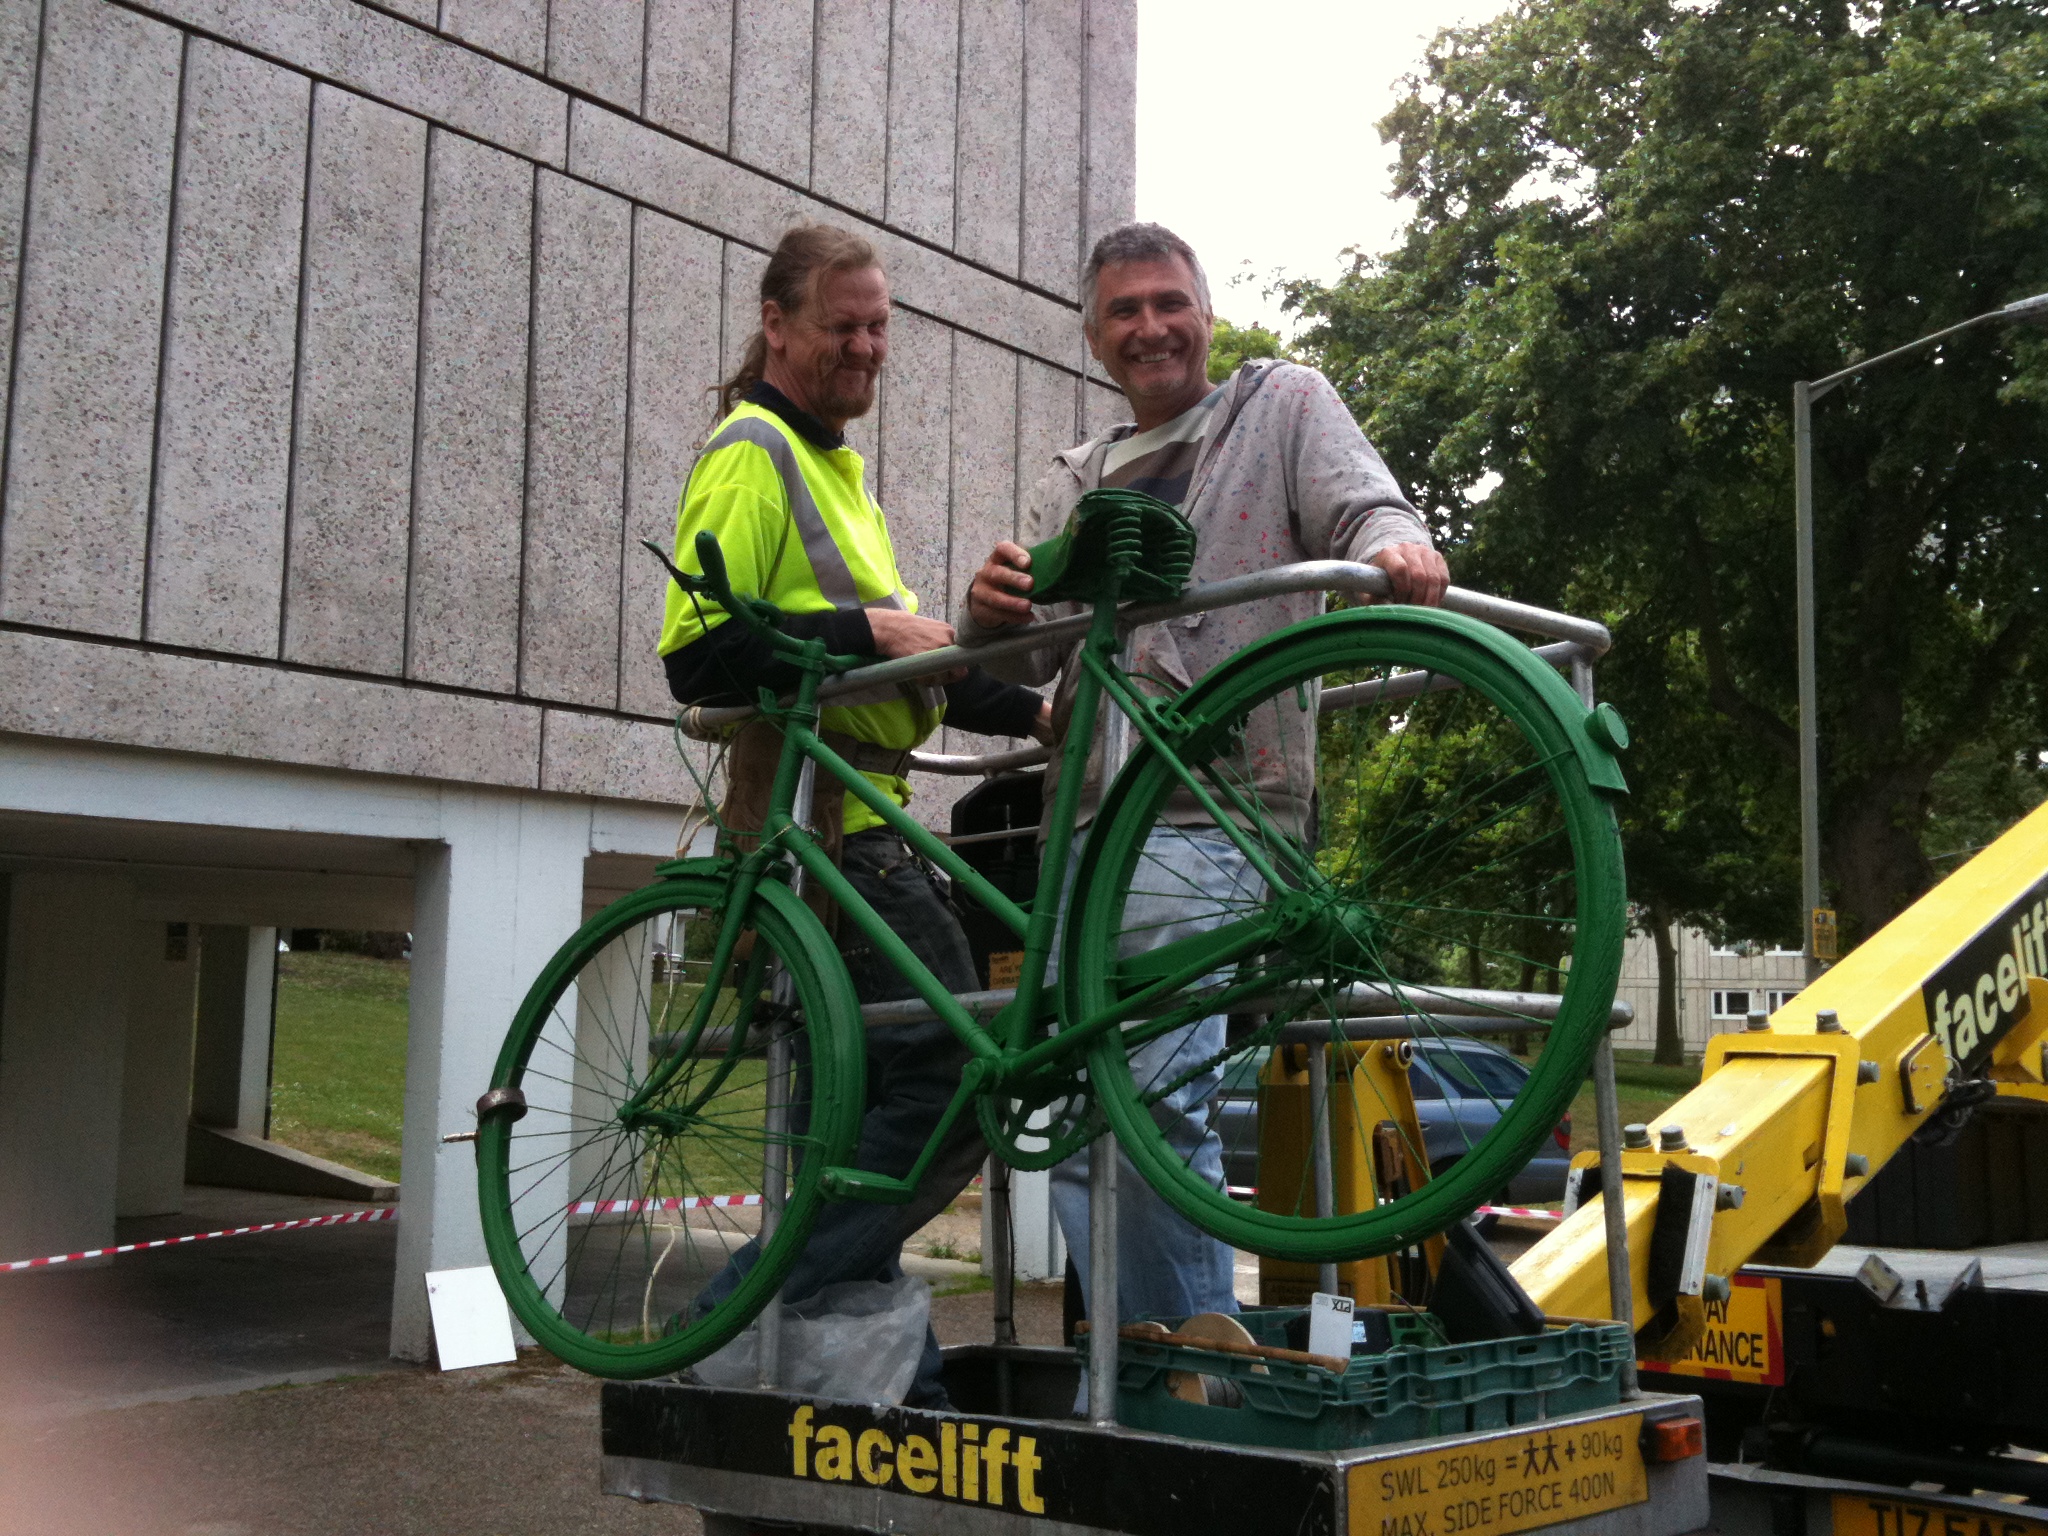 Performance Parking Technicians in cherry picker with a green bike